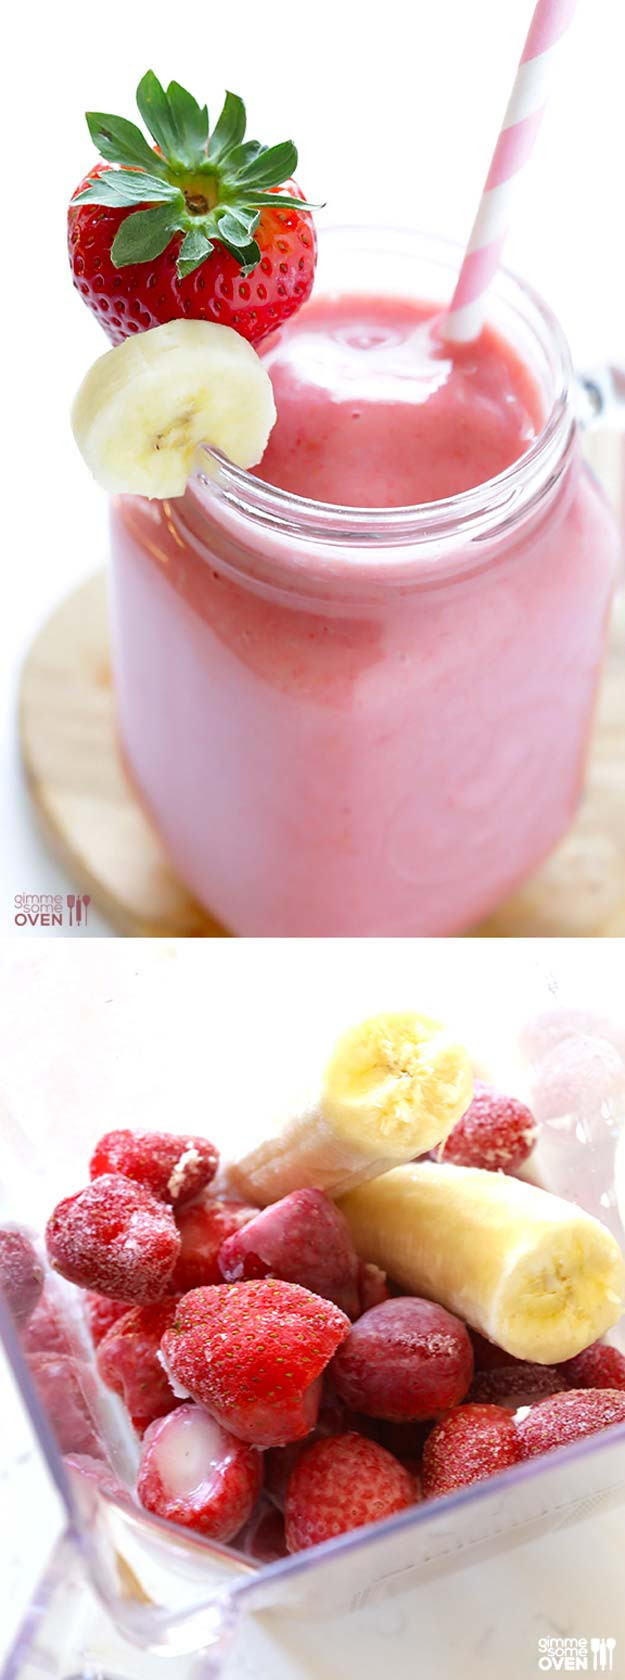 Strawberry Smoothie Recipes Healthy
 33 Healthy Smoothie Recipes The Goddess